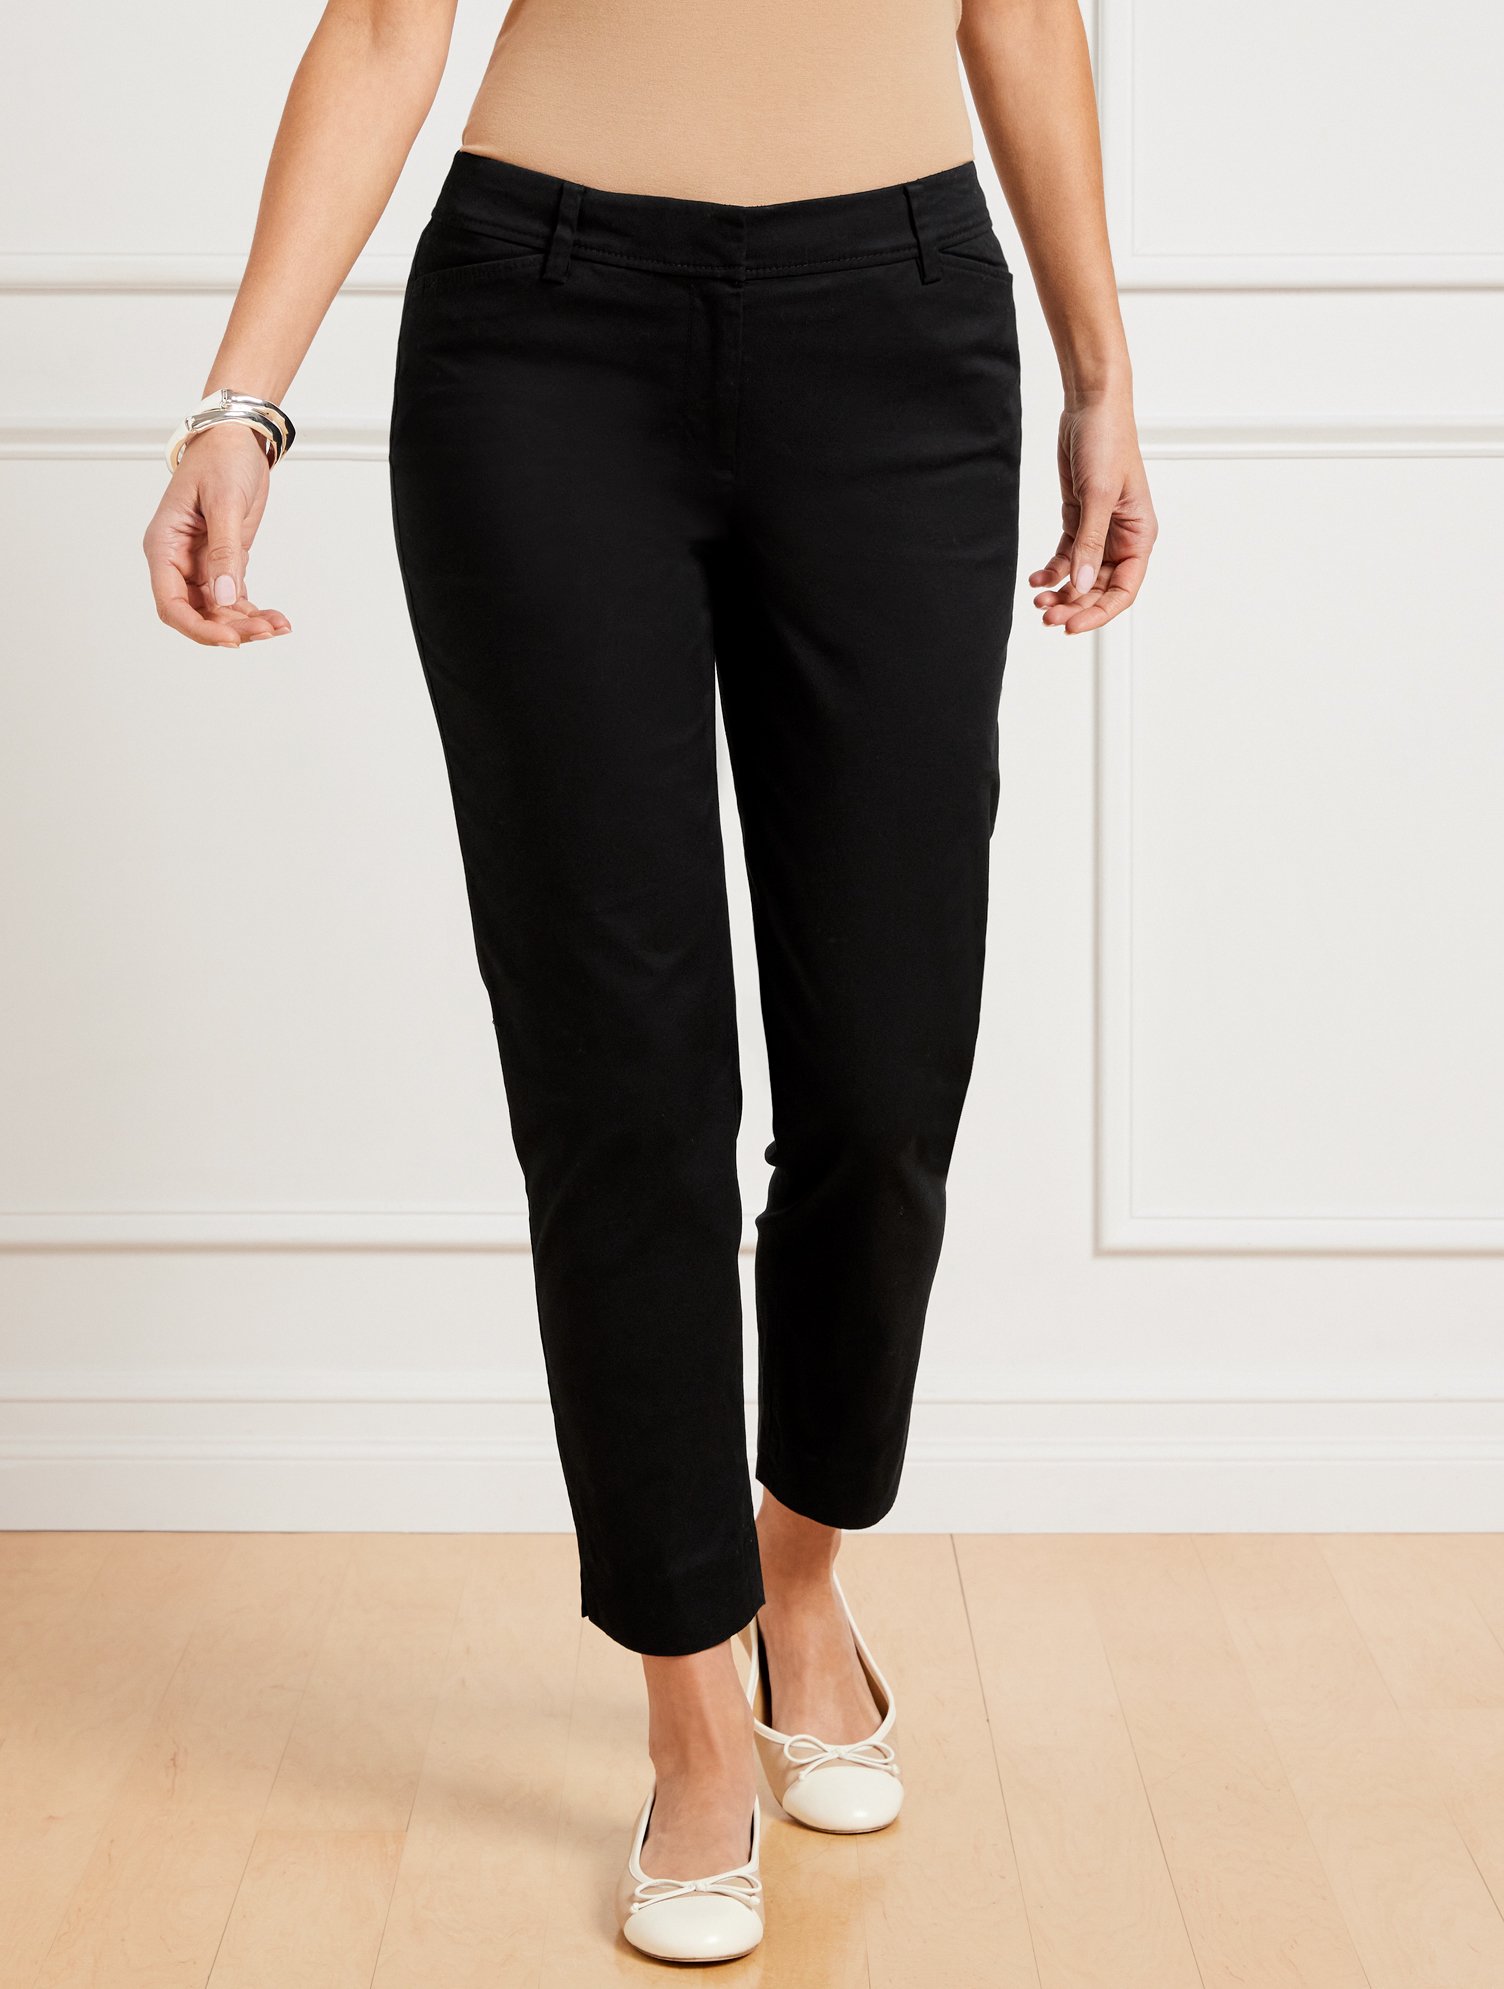 TALBOTS - Talbots Chatham Ankle Pants go merrily from